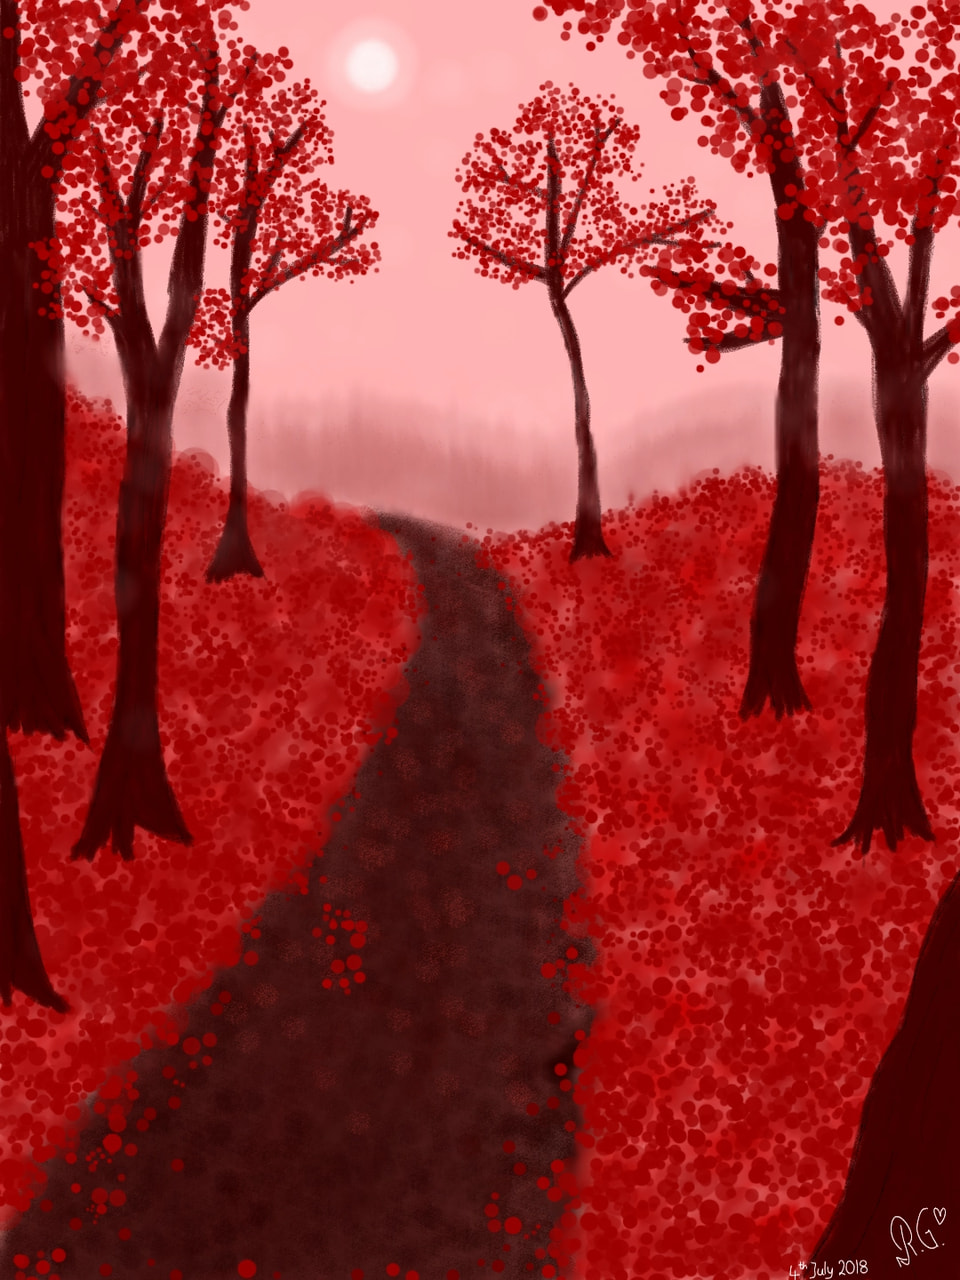 Red Forest 🍁 #redchallenge #colorweek #red #autumn #fall #forest #leaves